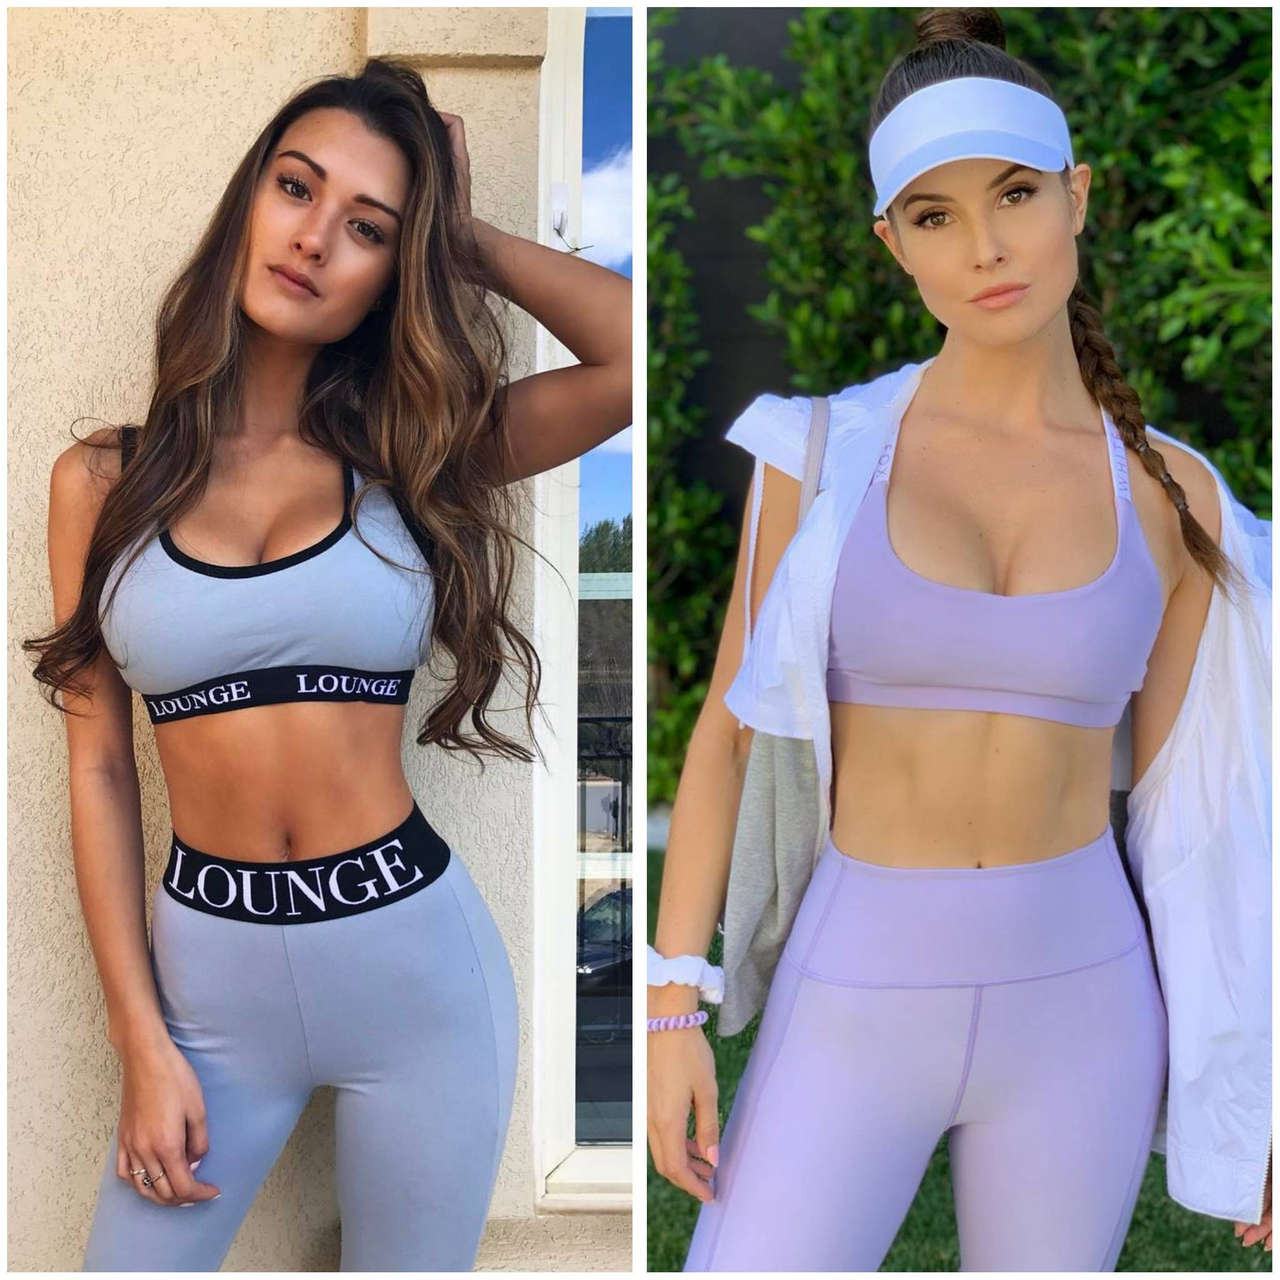 Who Would Win If These Two Were To Fight Keilah Kang Vs Amanda Cerny Nud